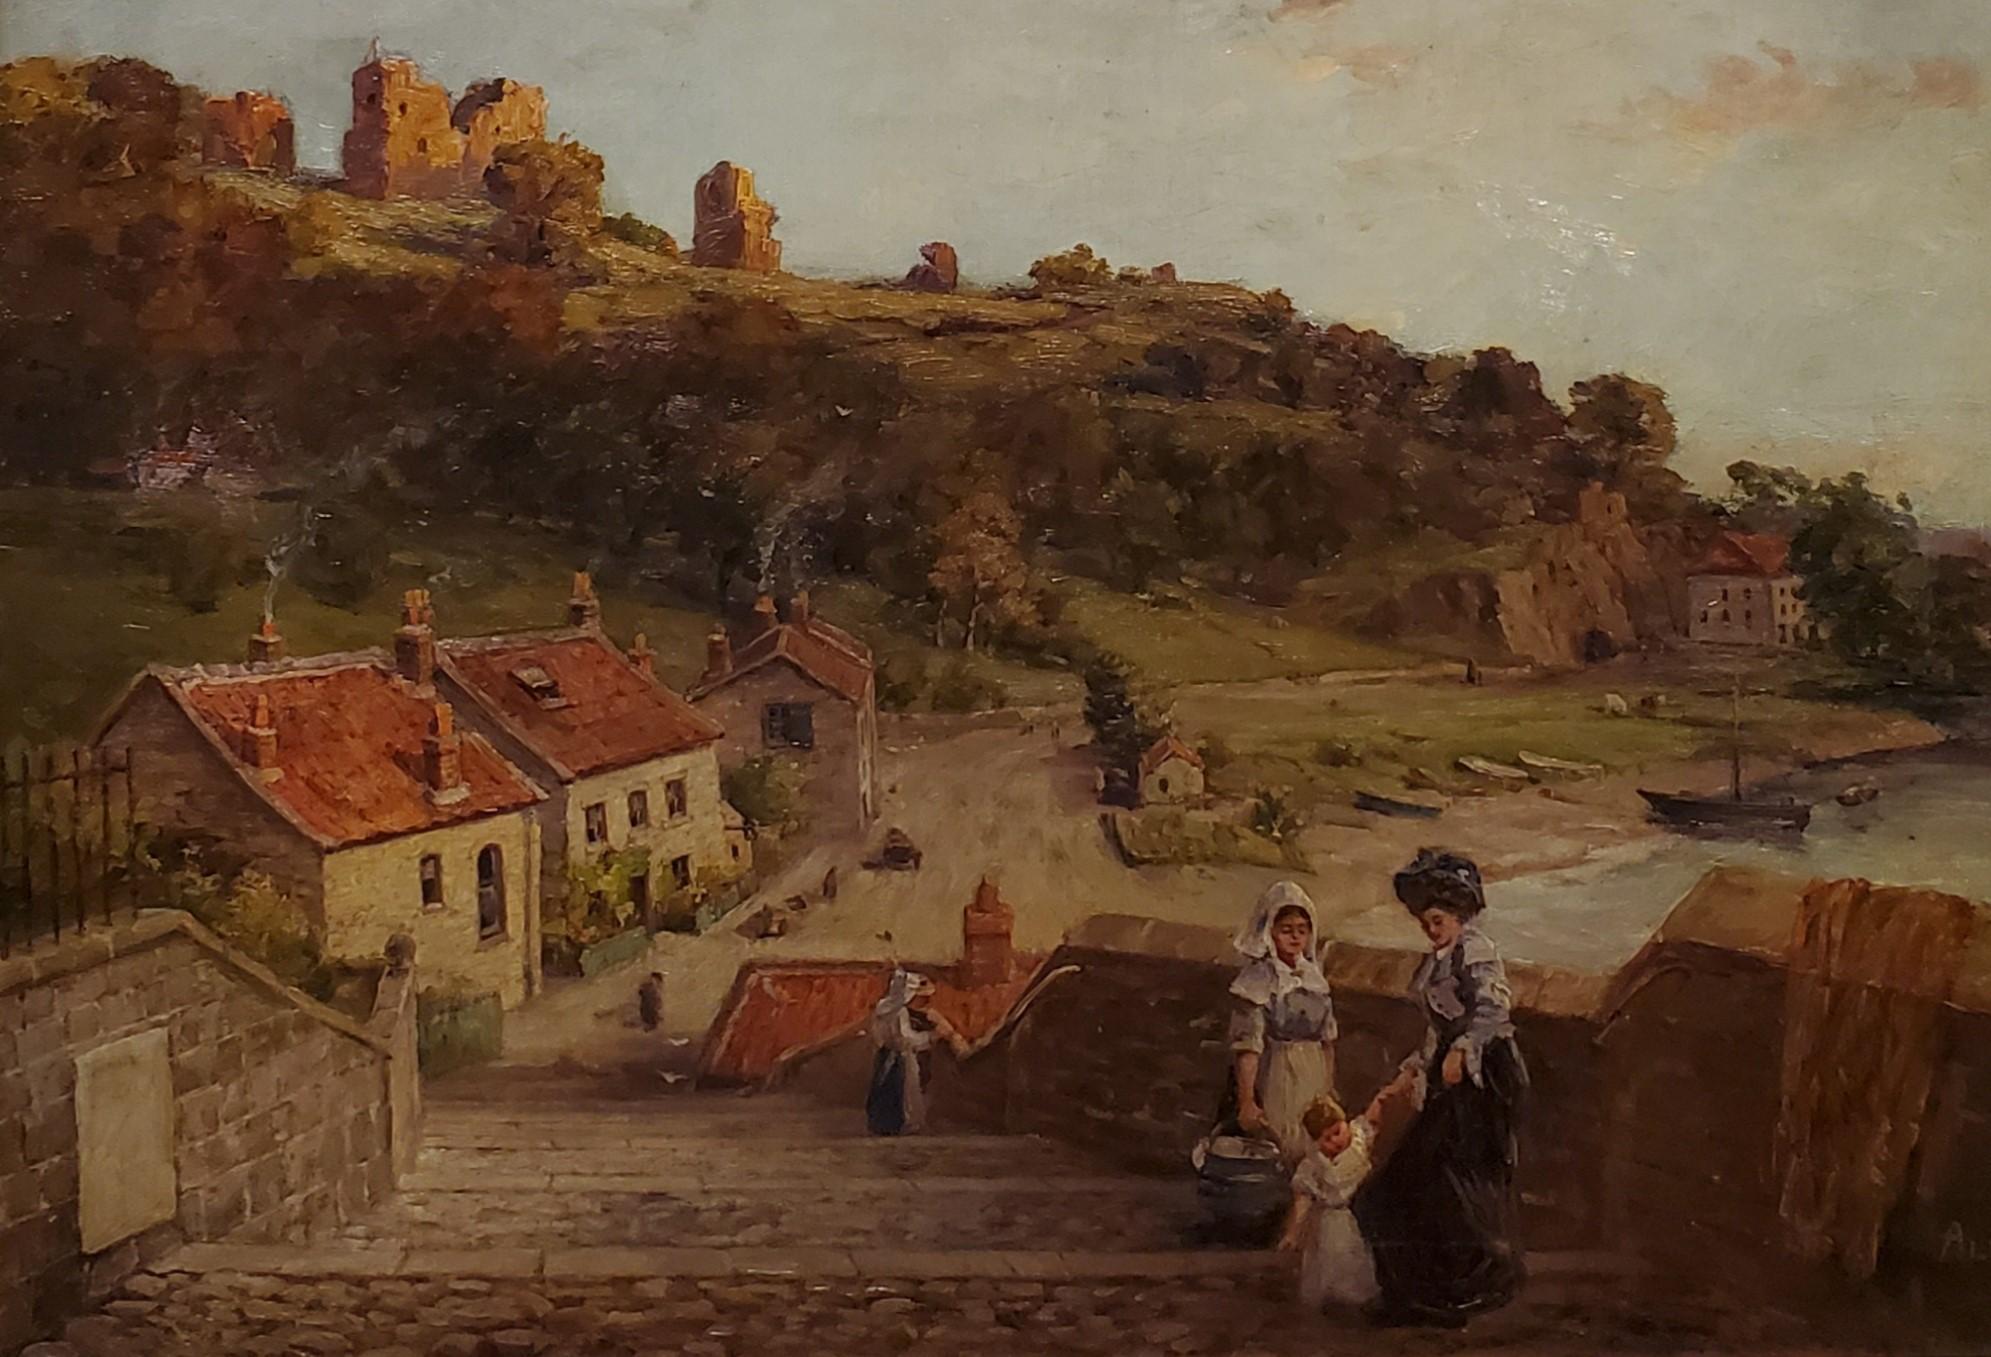 Landscape View of Knaresborough Yorkshire United Kingdom in the 19th Century - Brown Landscape Painting by Alfred Addy